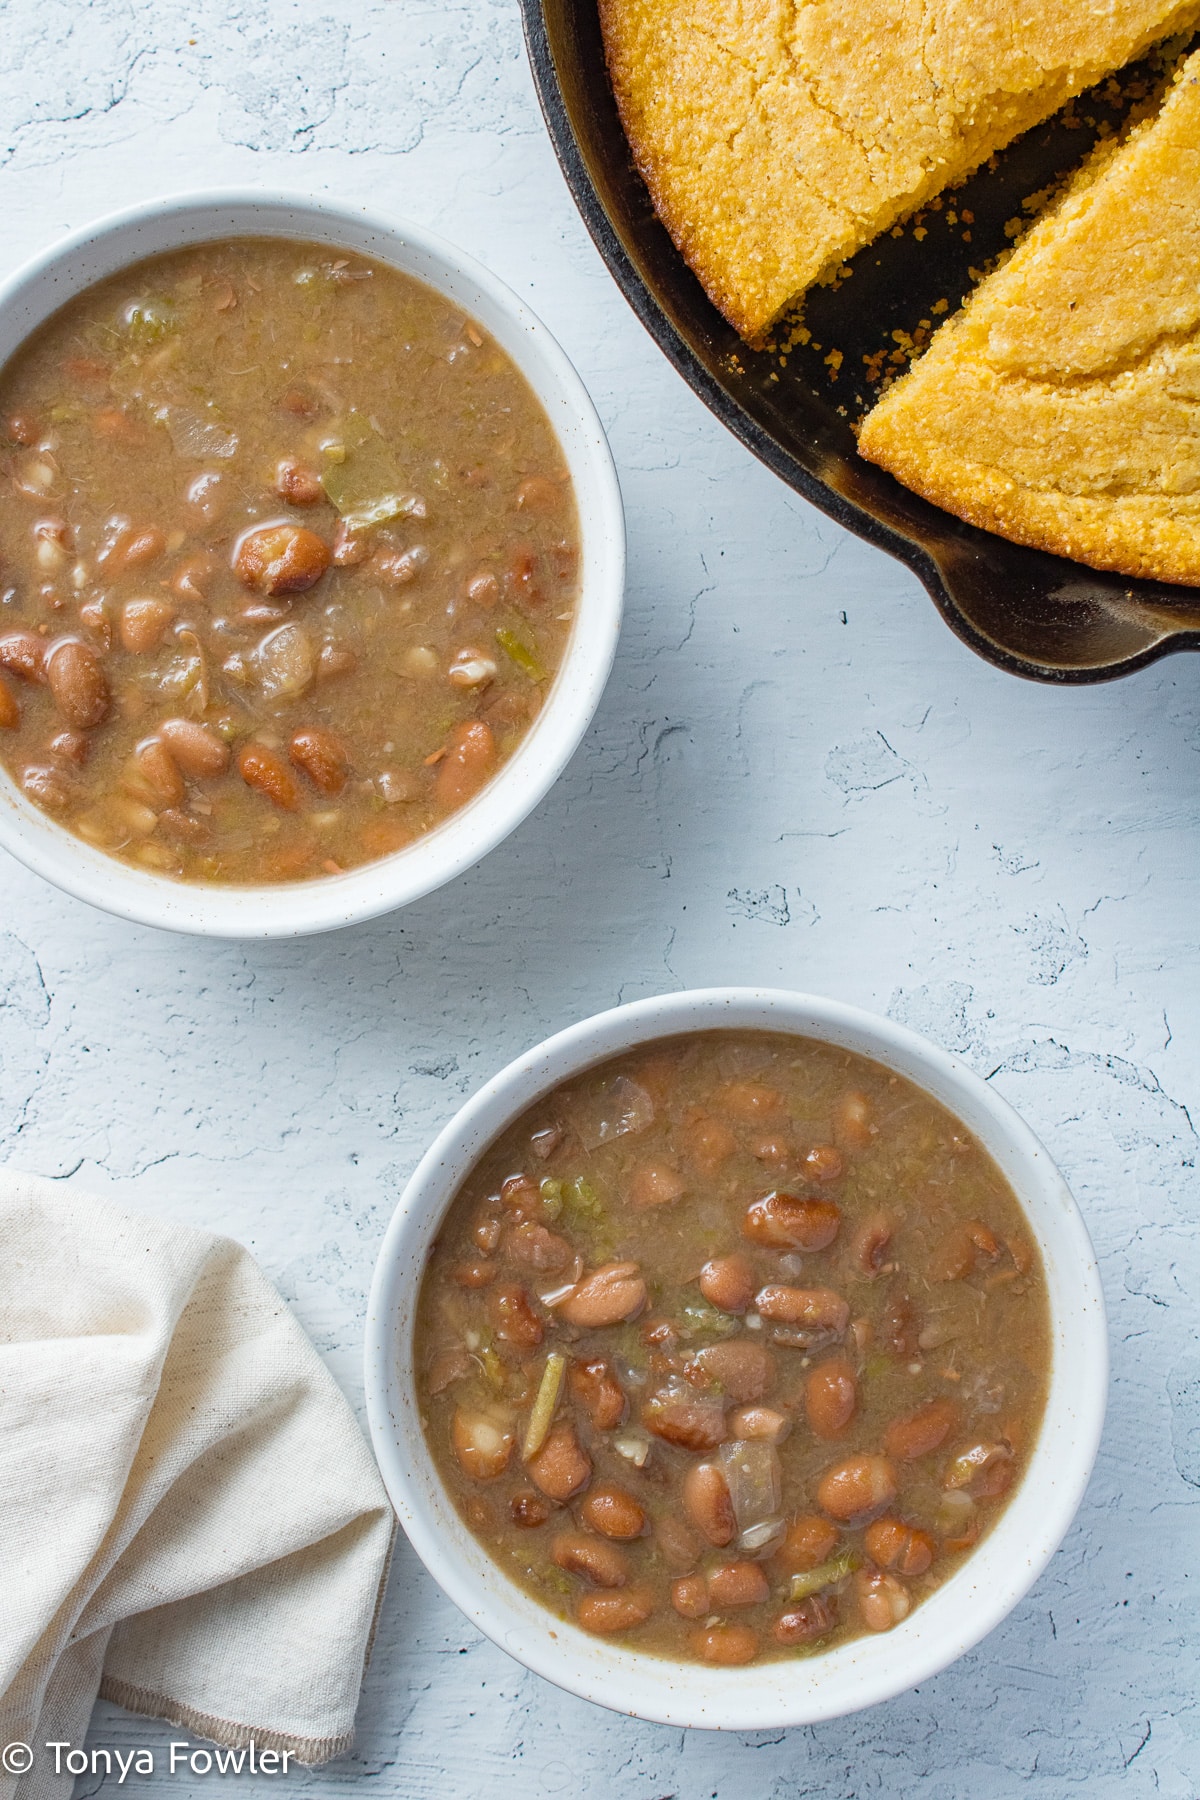 Beans in bowls with cornbread in a skillet near by.